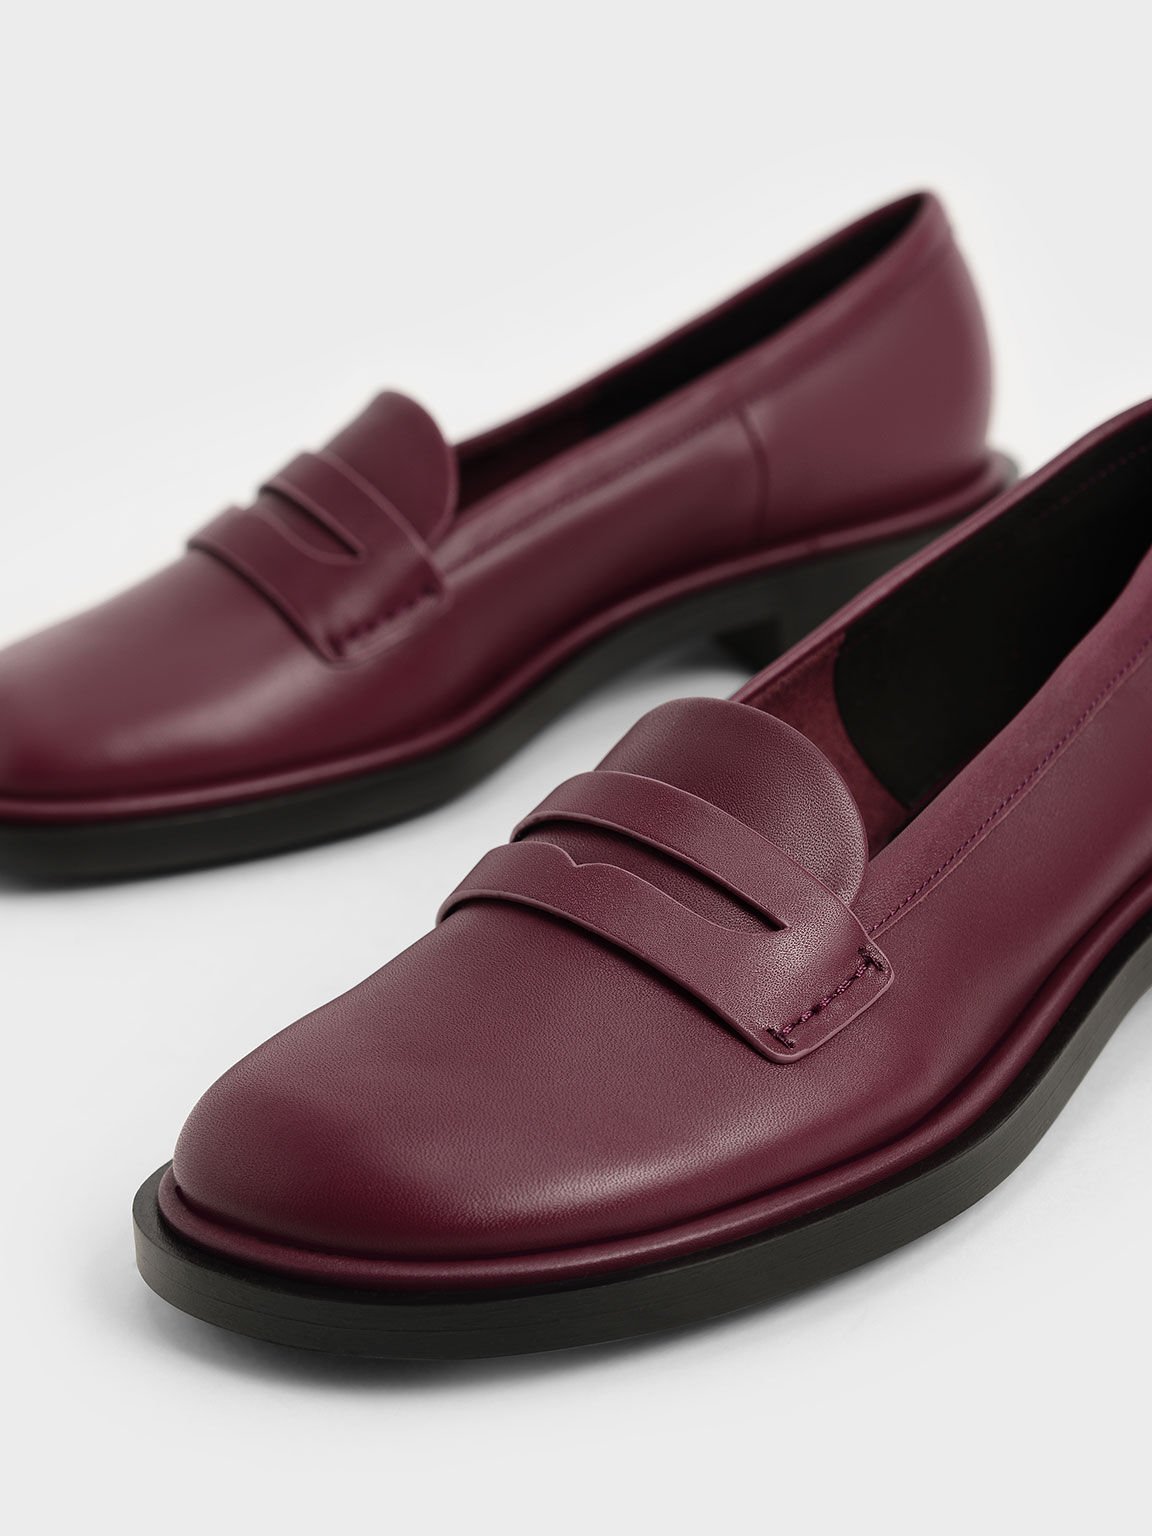 Rumi Leather Penny Loafers, Burgundy, hi-res